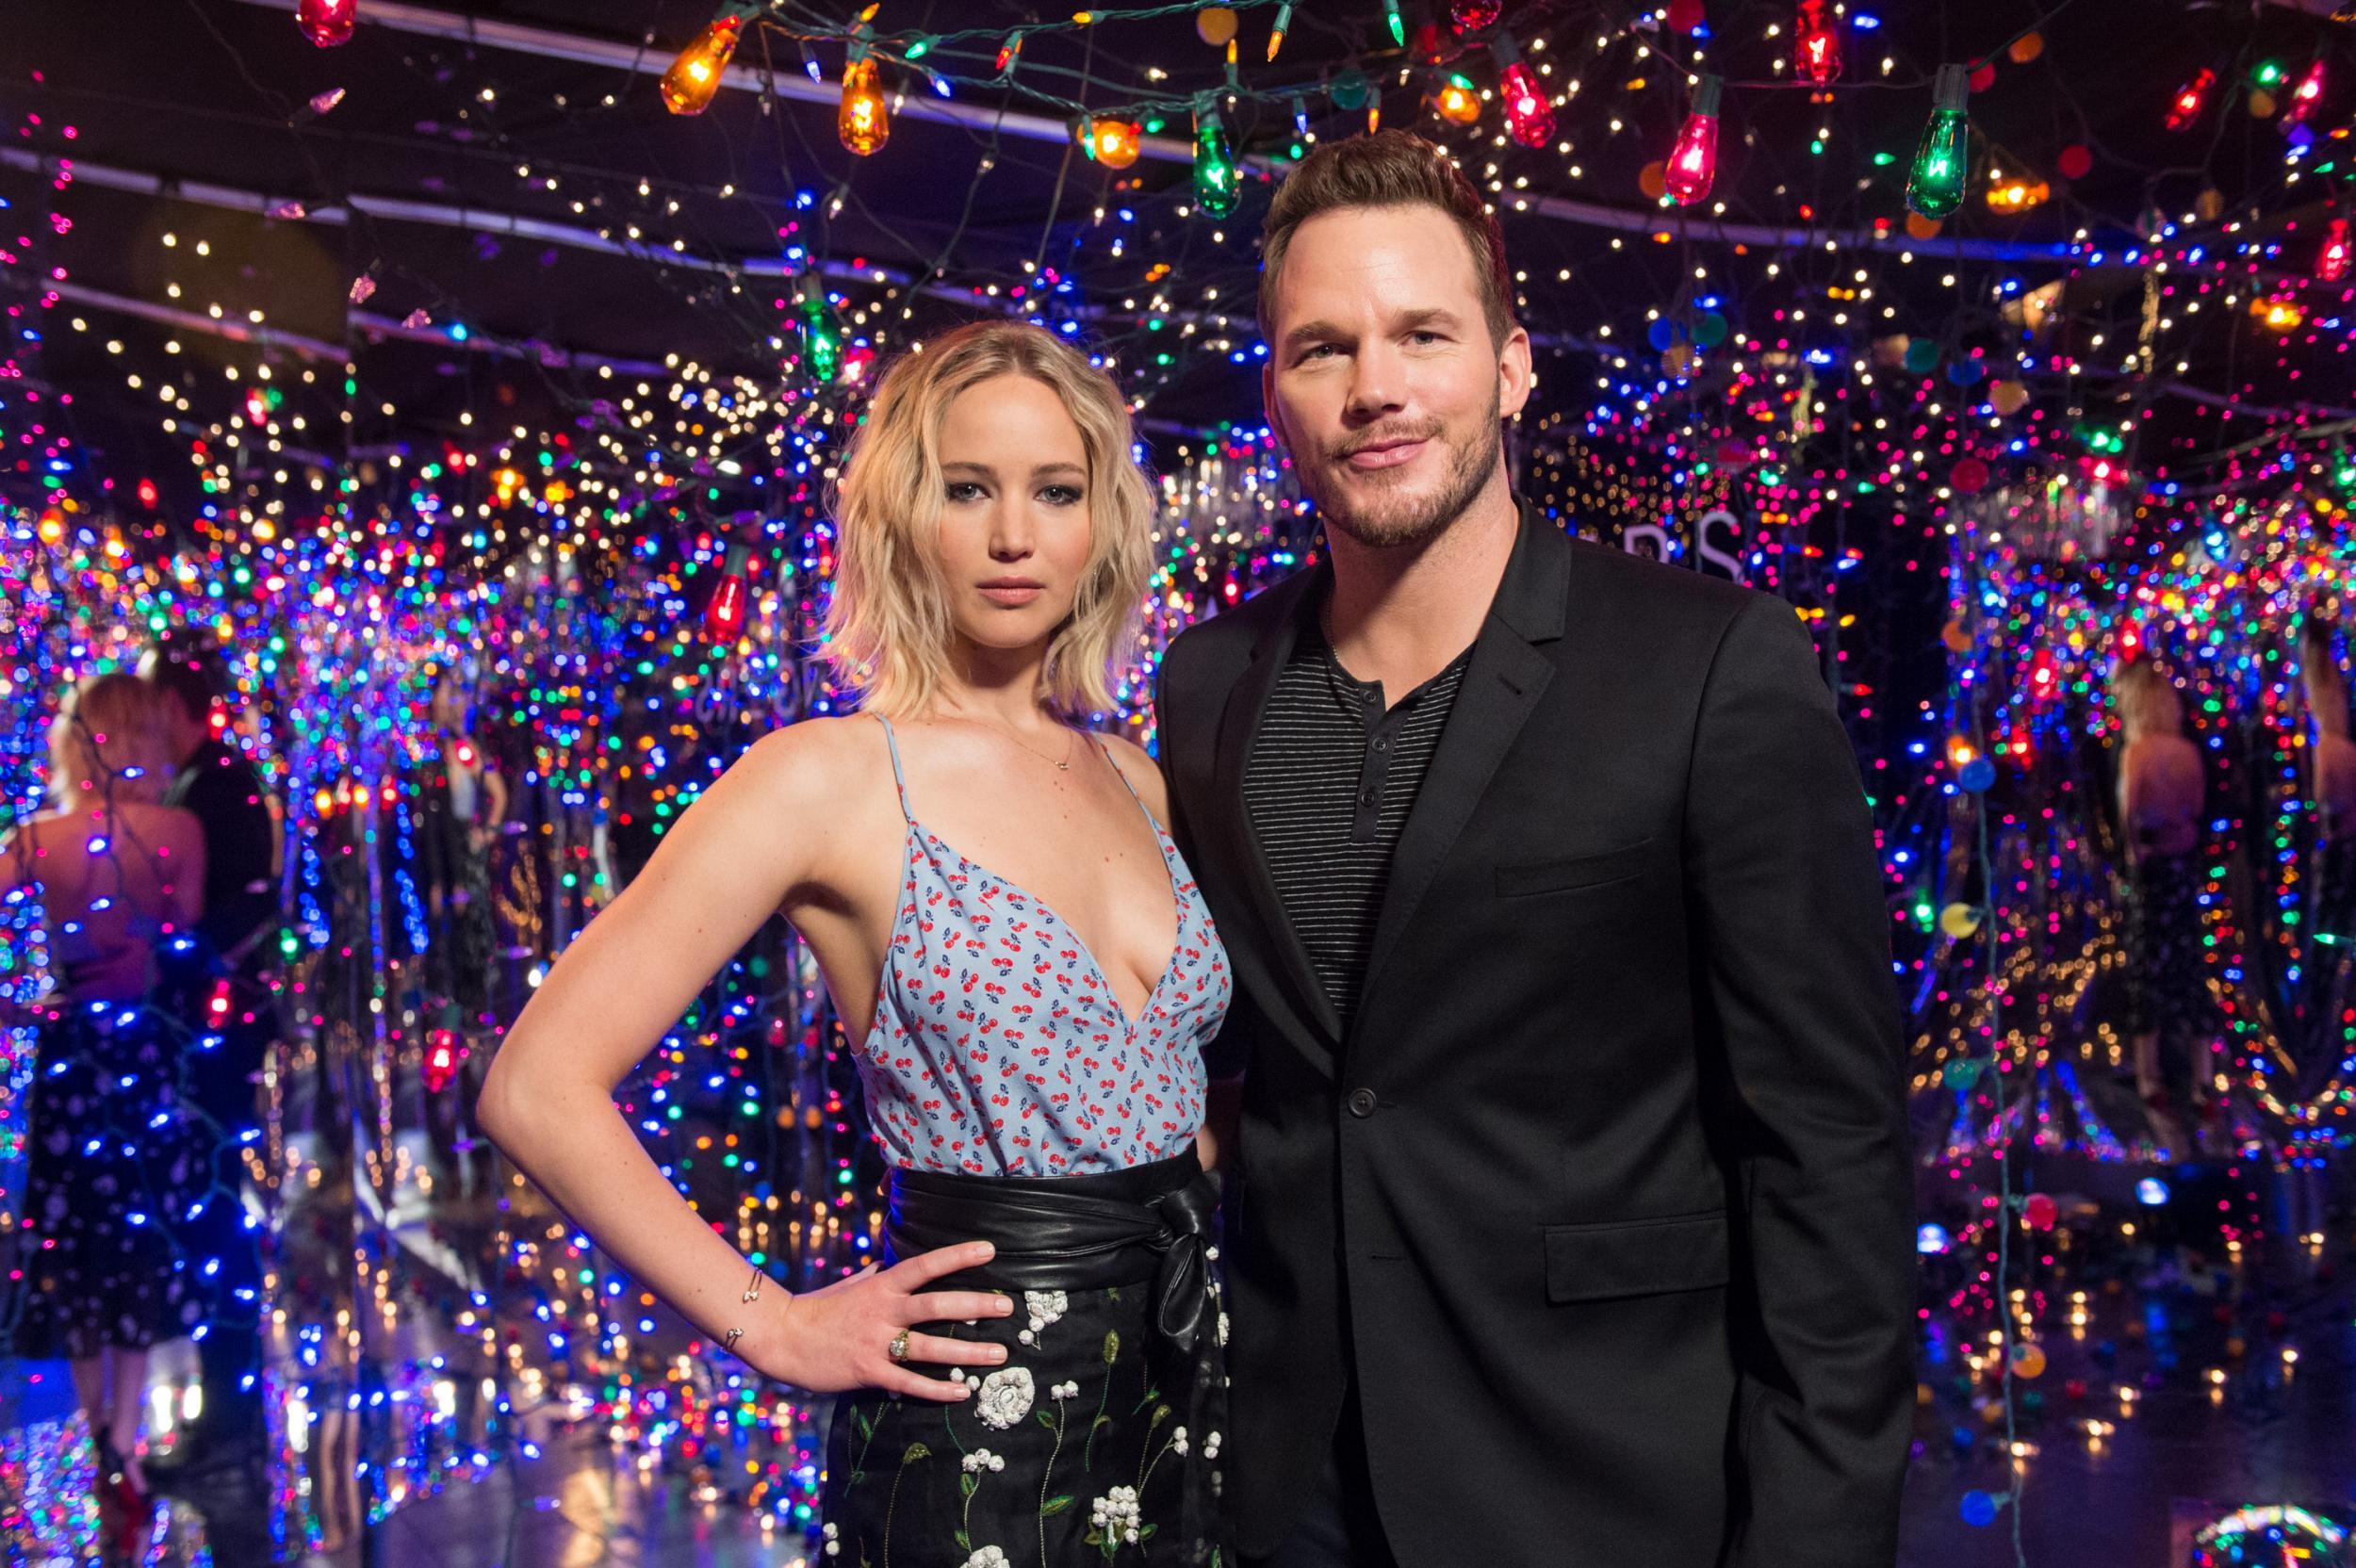 Jennifer Lawrence and Chris Pratt cut off from radio interview after question about sex The Independent The Independent